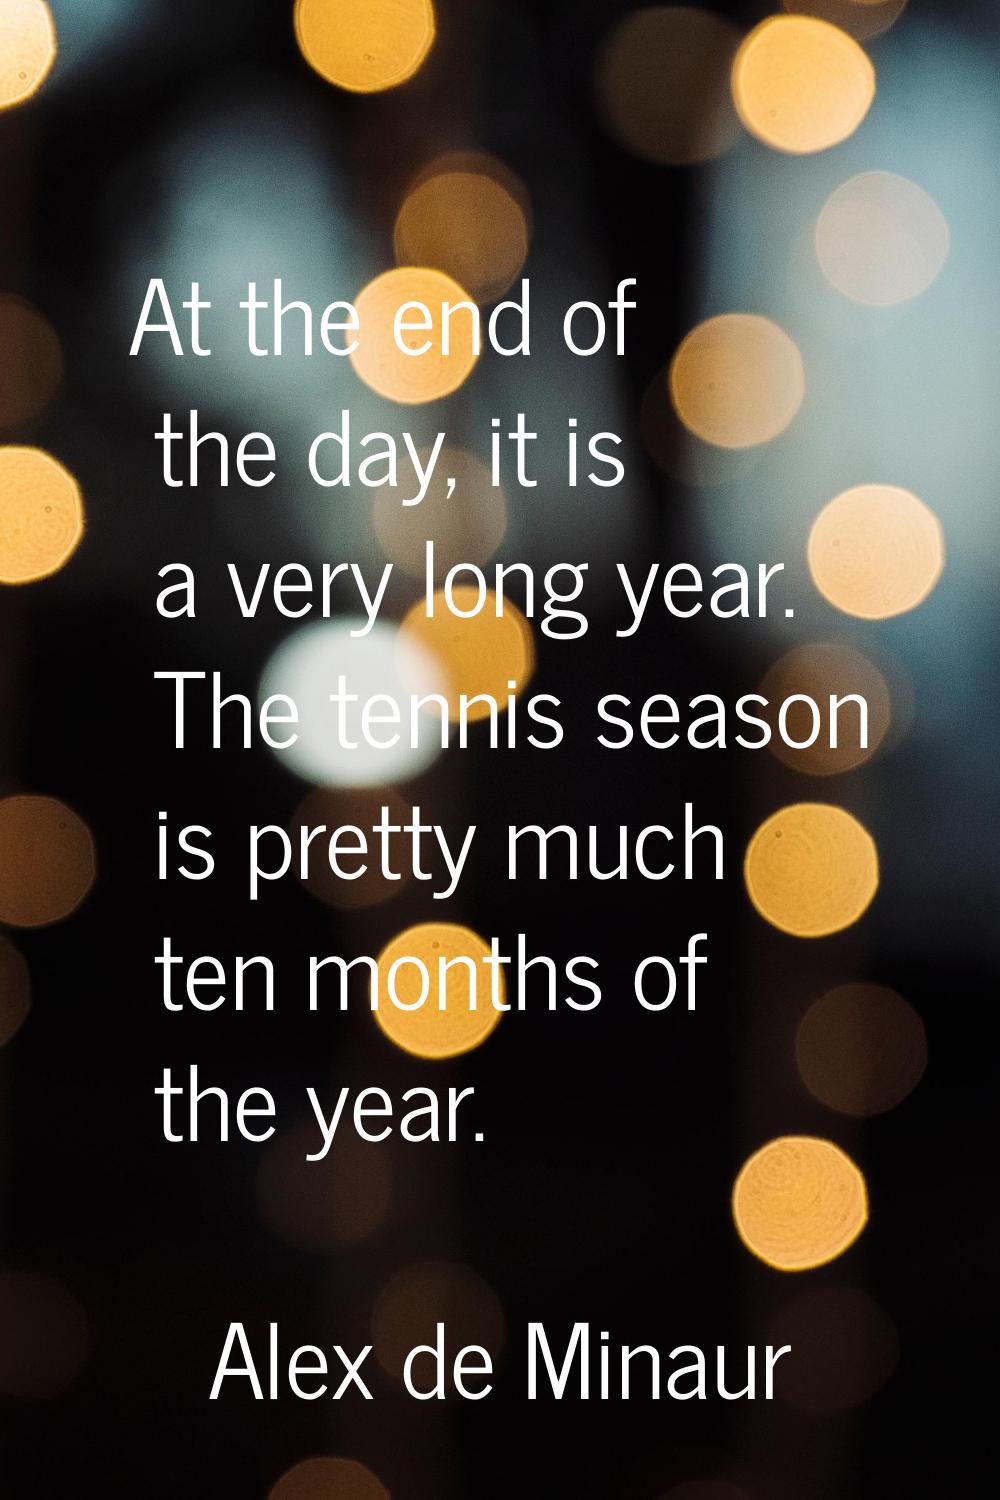 At the end of the day, it is a very long year. The tennis season is pretty much ten months of the y